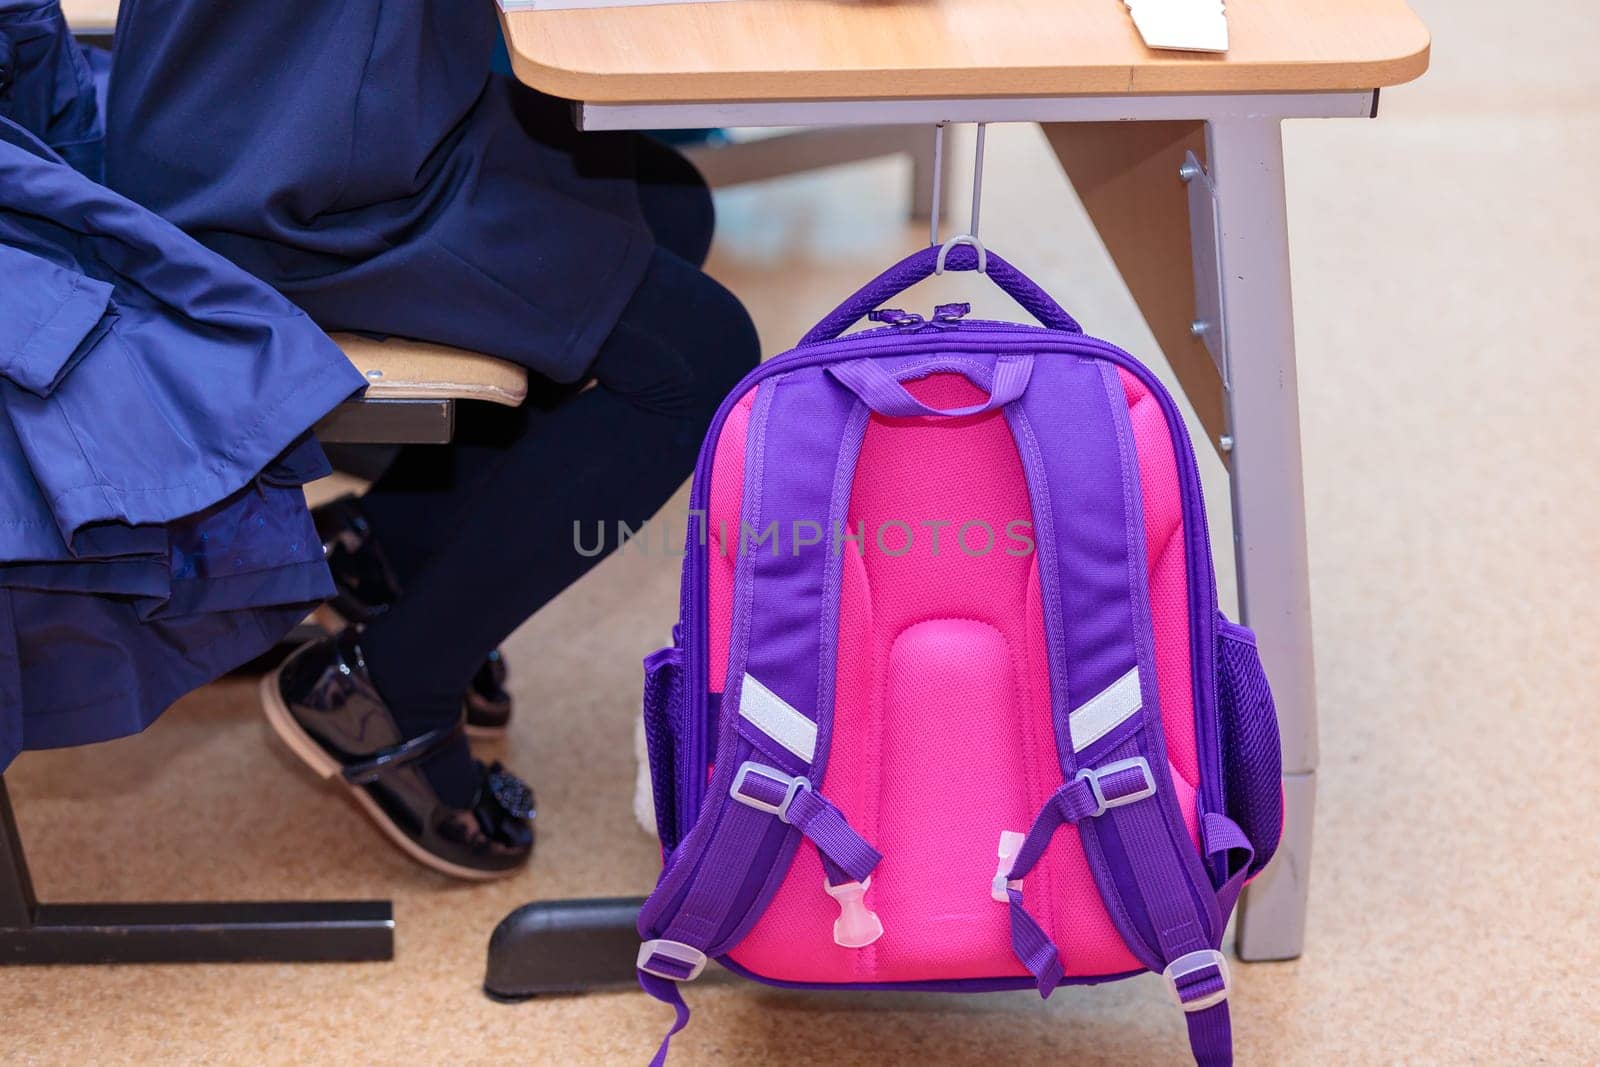 The school backpack hangs on a hook at the desk where the student sits. by Yurich32